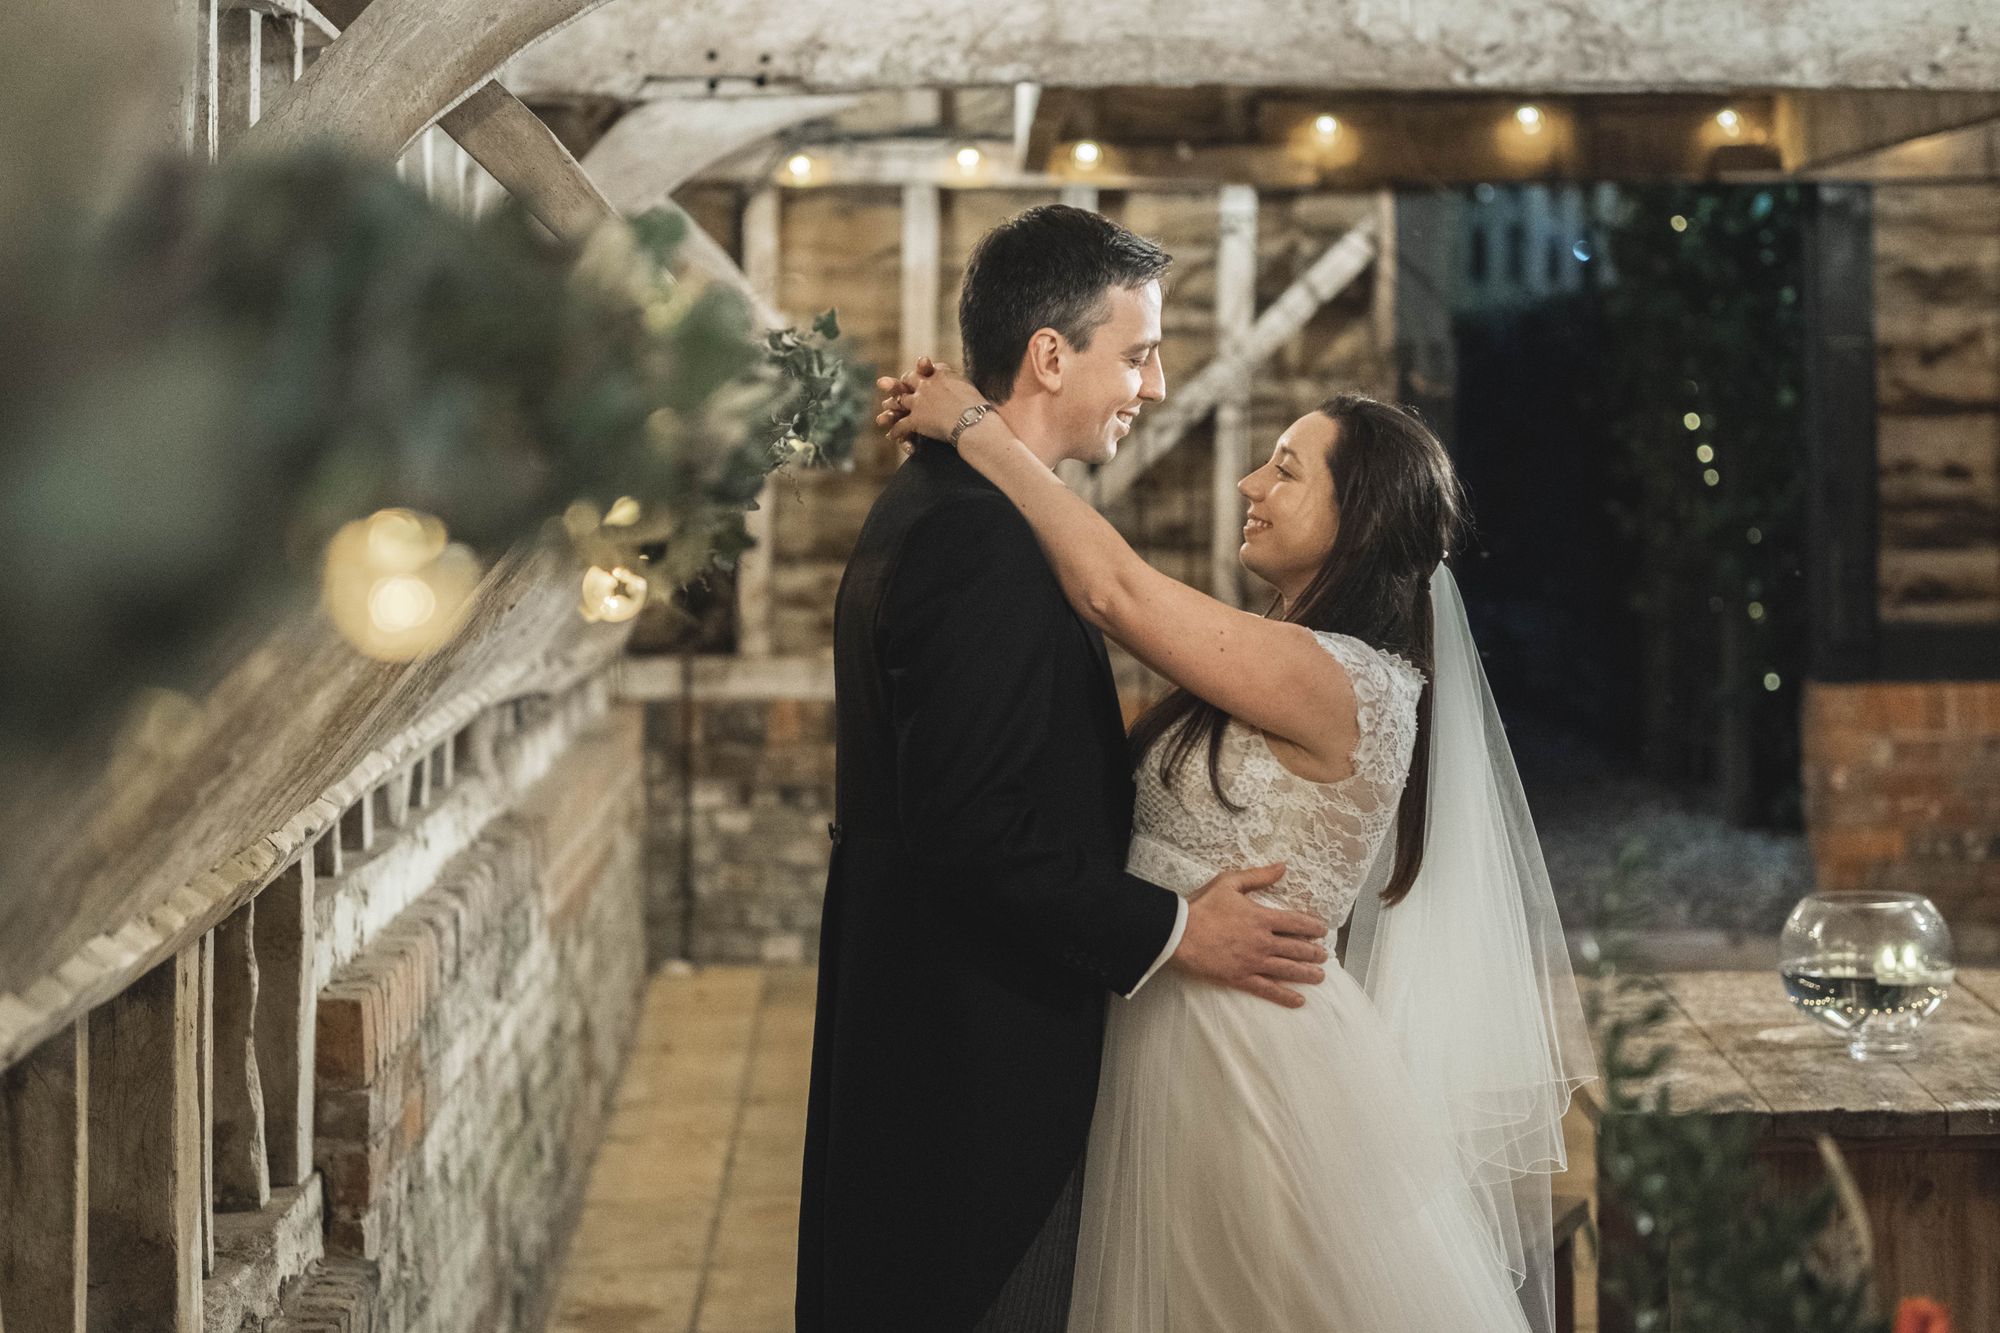 Jennifer and James under the covered byre at Lains Barn embracing under the twinkling lights. Photo thanks to The Falkenburgs via Big Day Productions